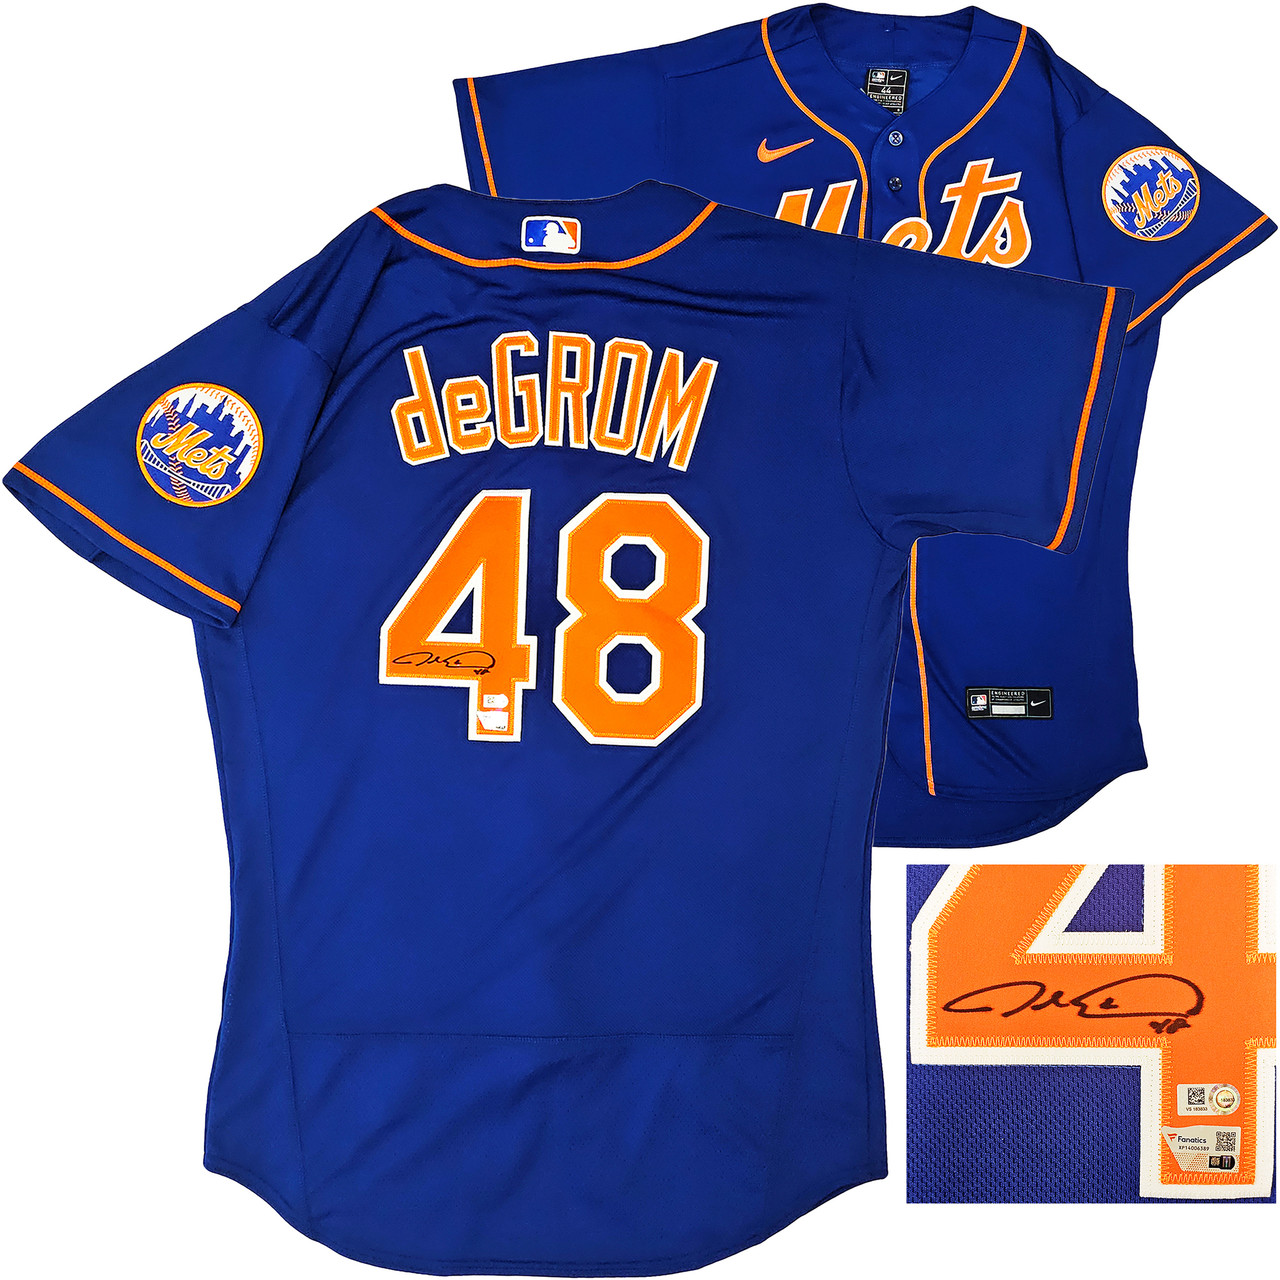 MLB Jacob deGrom Signed Jerseys, Collectible Jacob deGrom Signed